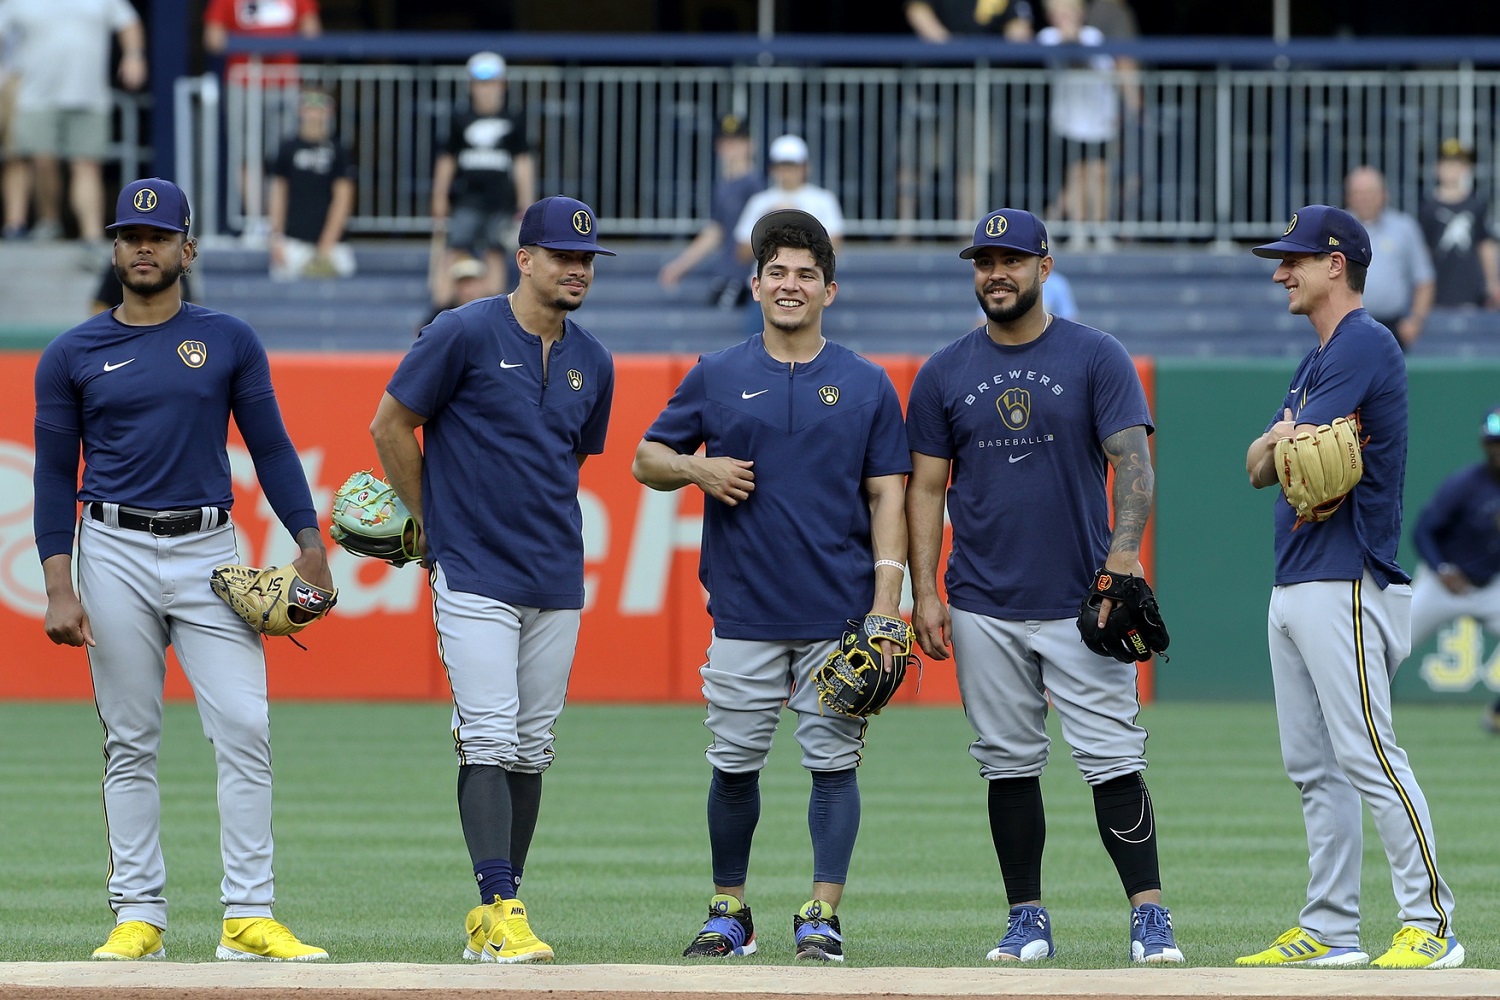 the brewers team